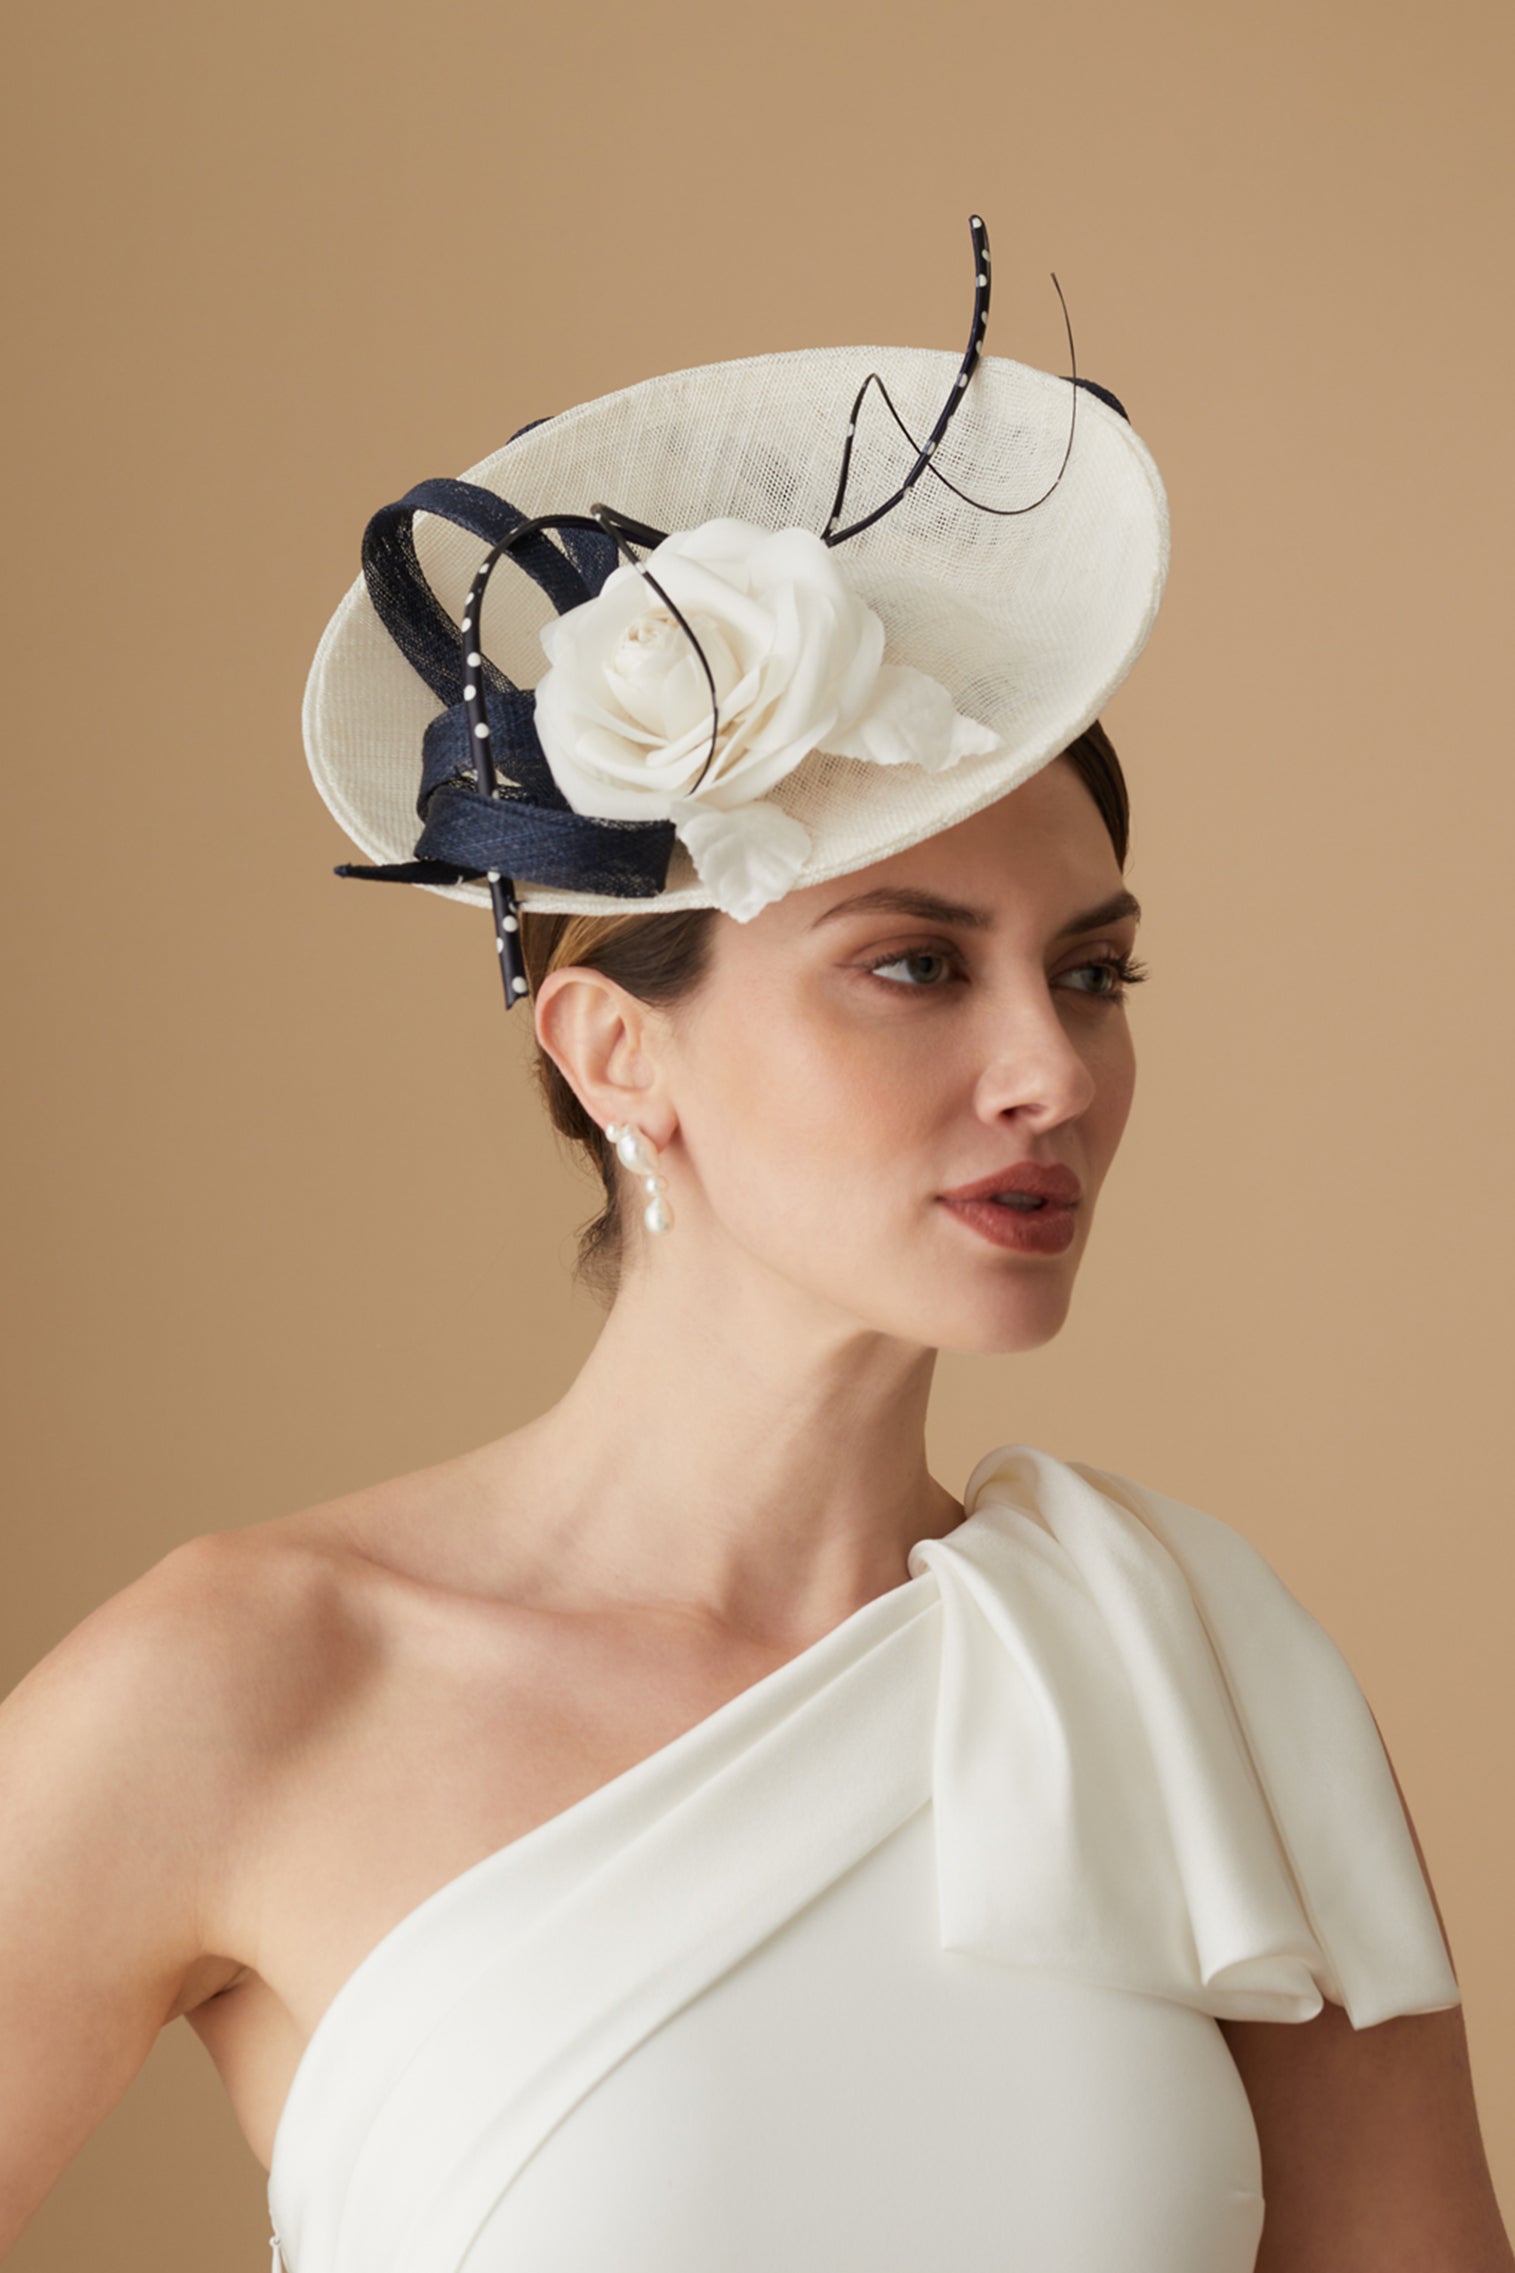 Assam White and Navy Saucer Hat - Products - Lock & Co. Hatters London UK